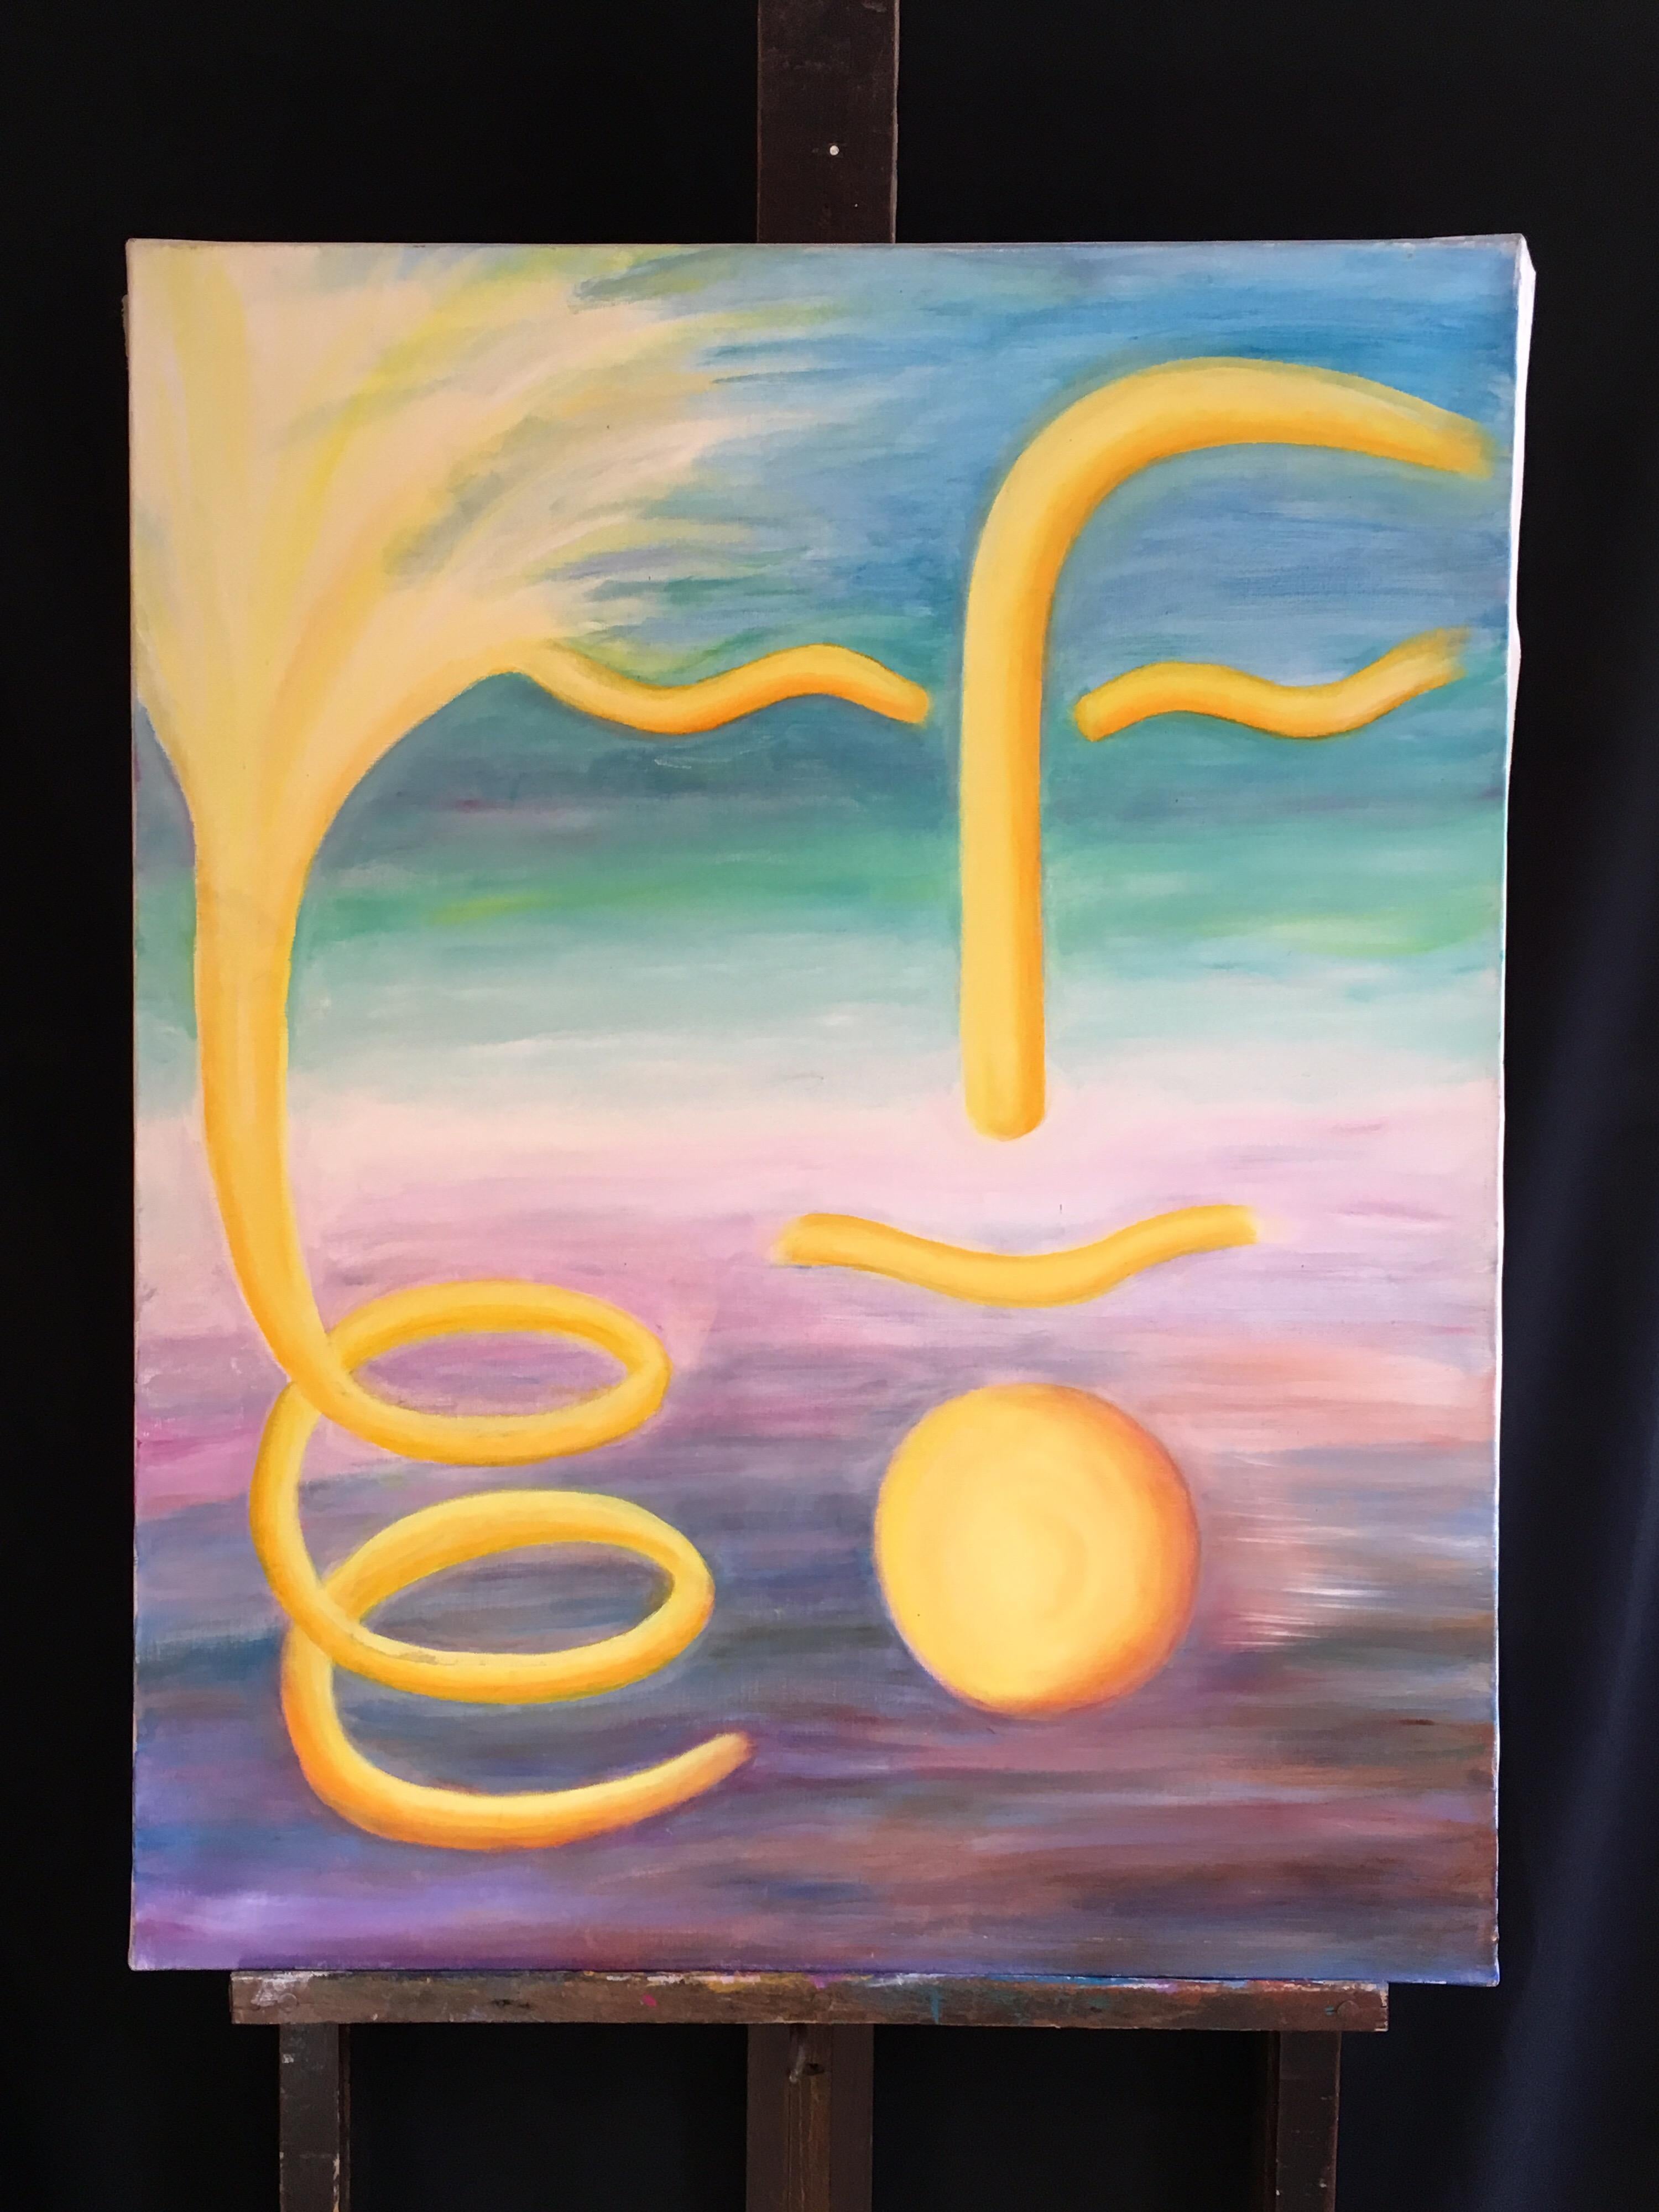 Large Surrealist Abstract, Yellow, Original Oil Painting
By French artist, Sophie Danielle Rubinstain 1922-2018
The painting is stamped with the artists atelier sale stamp verso
Oil painting on canvas, unframed
Canvas size: 36 x 29 inches

Stunning